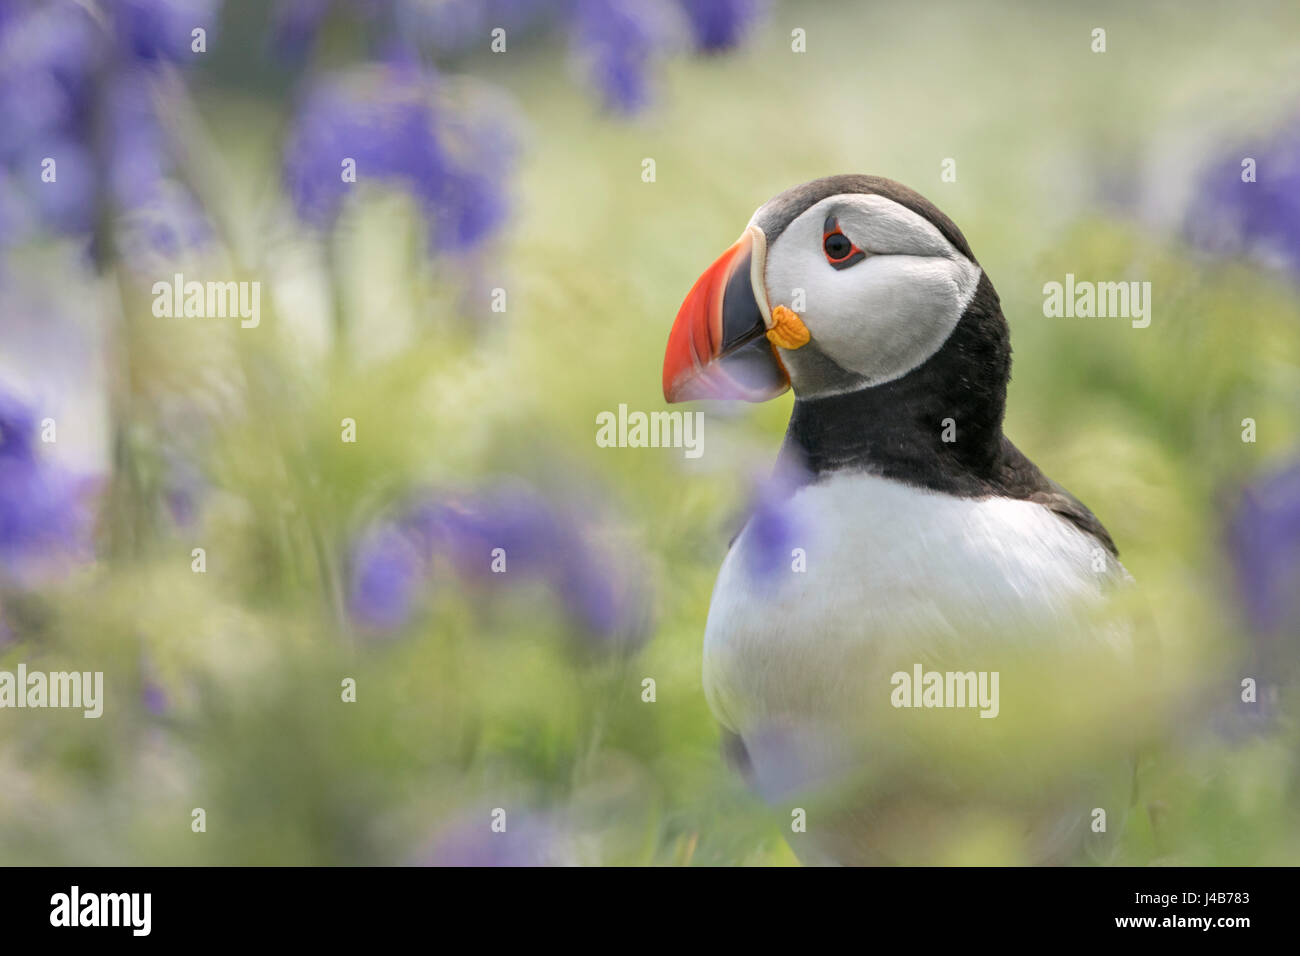 Atlantic Puffin (Fratercula arctica) stood among Bluebell flowers at the Wick, Skomer Island, Pembrokeshire, Wales Stock Photo